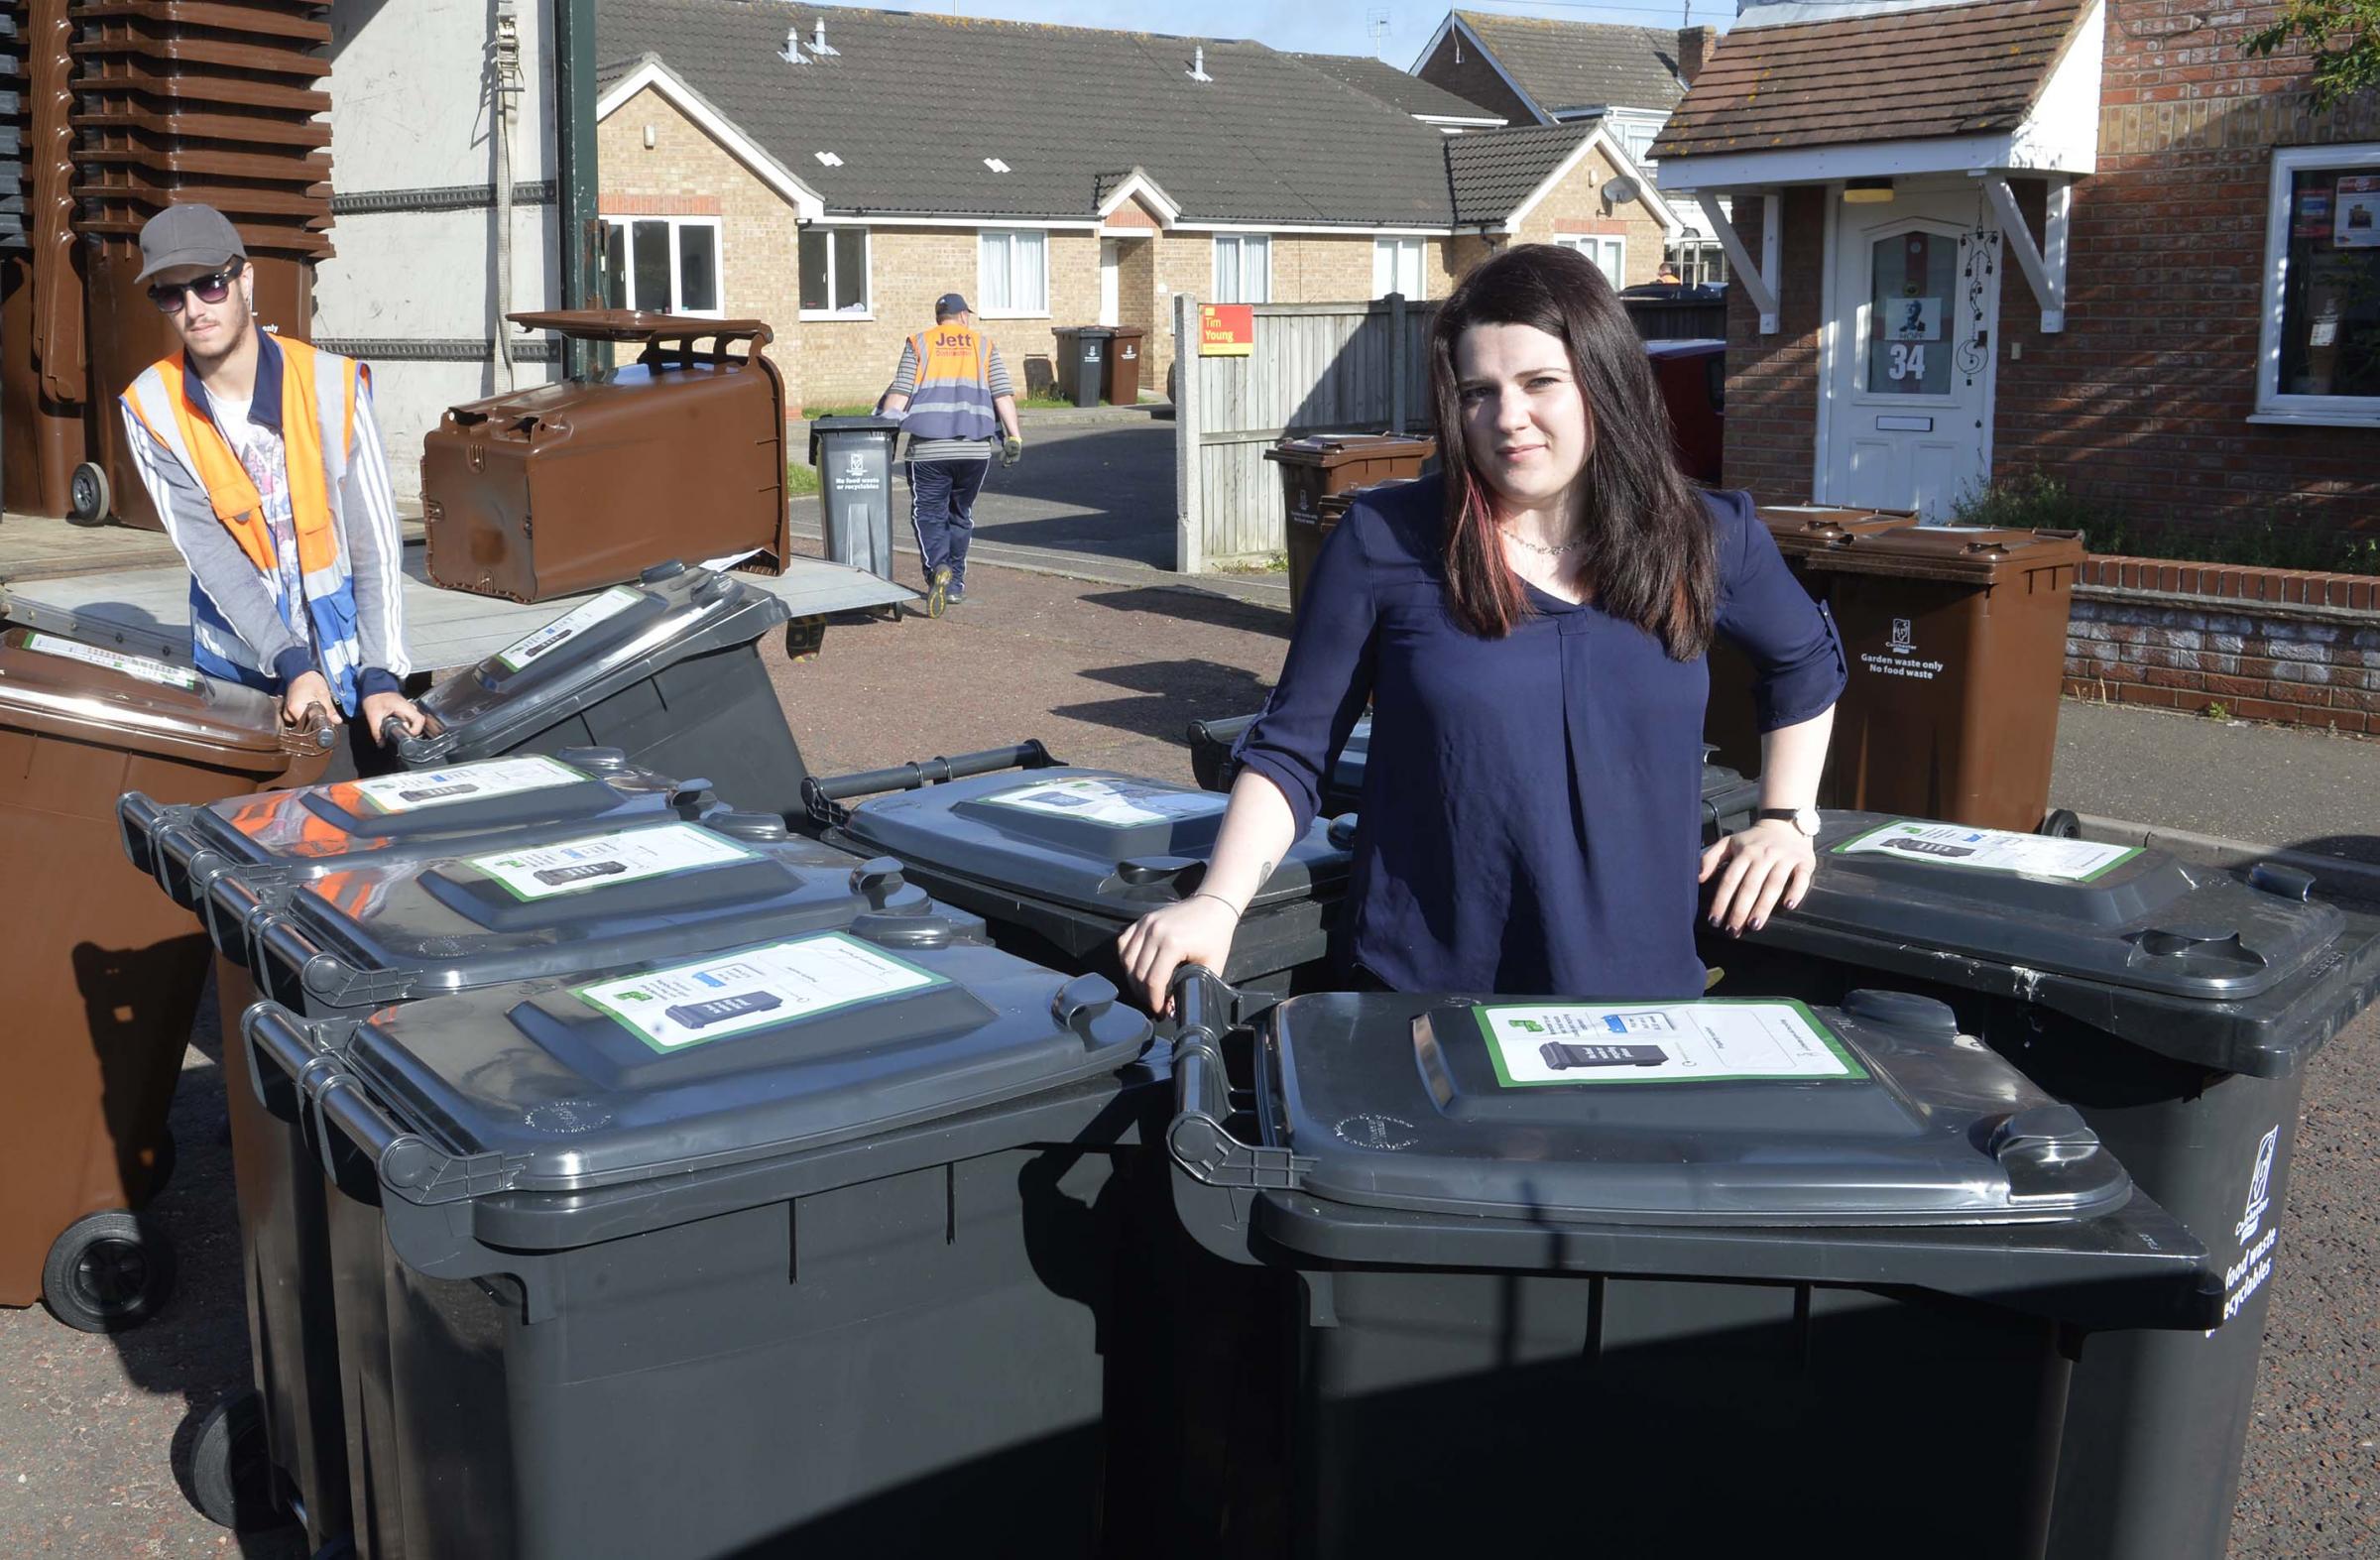 'Please be patient with us - things will get better' - council bosses ask for time to allow new recycling system to work